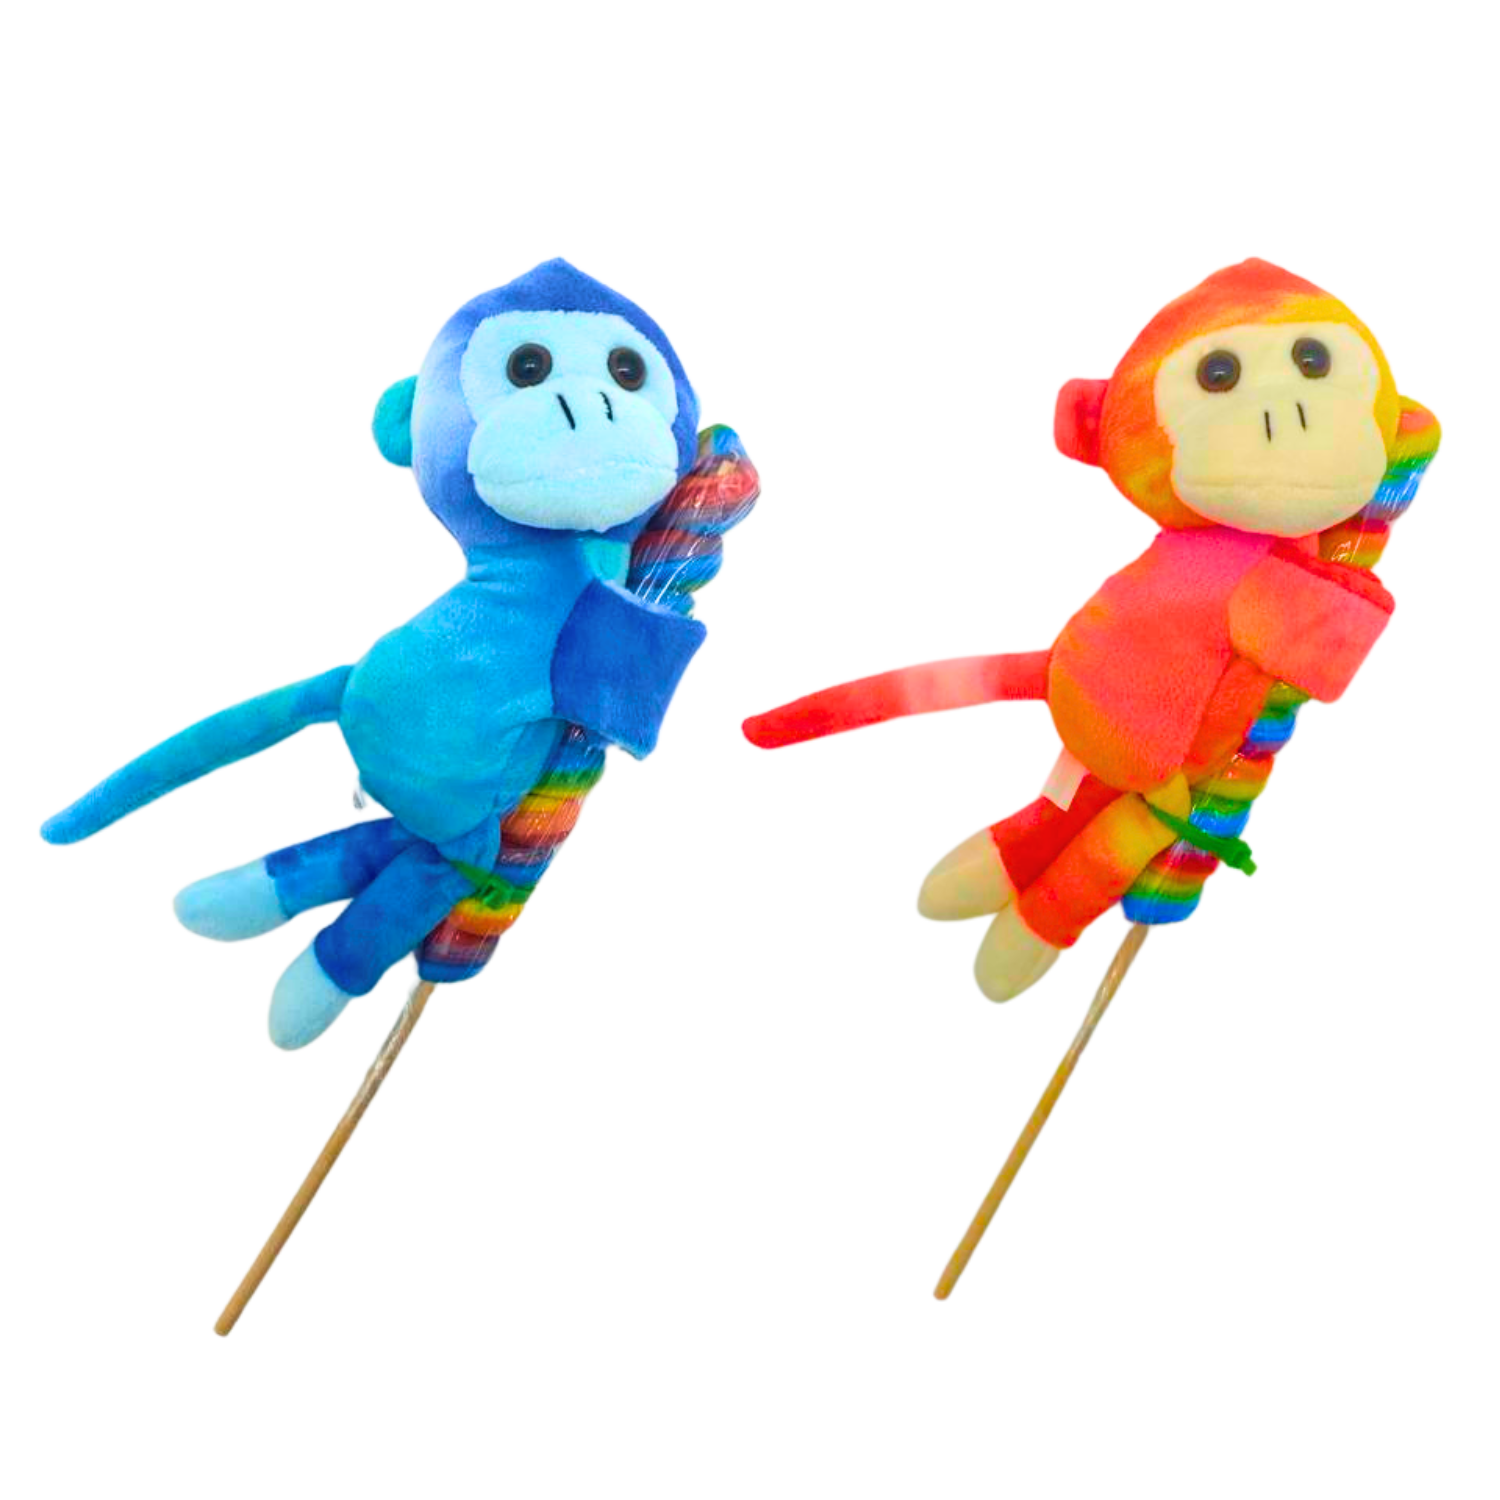 Monkey Snap-On With Lollipop